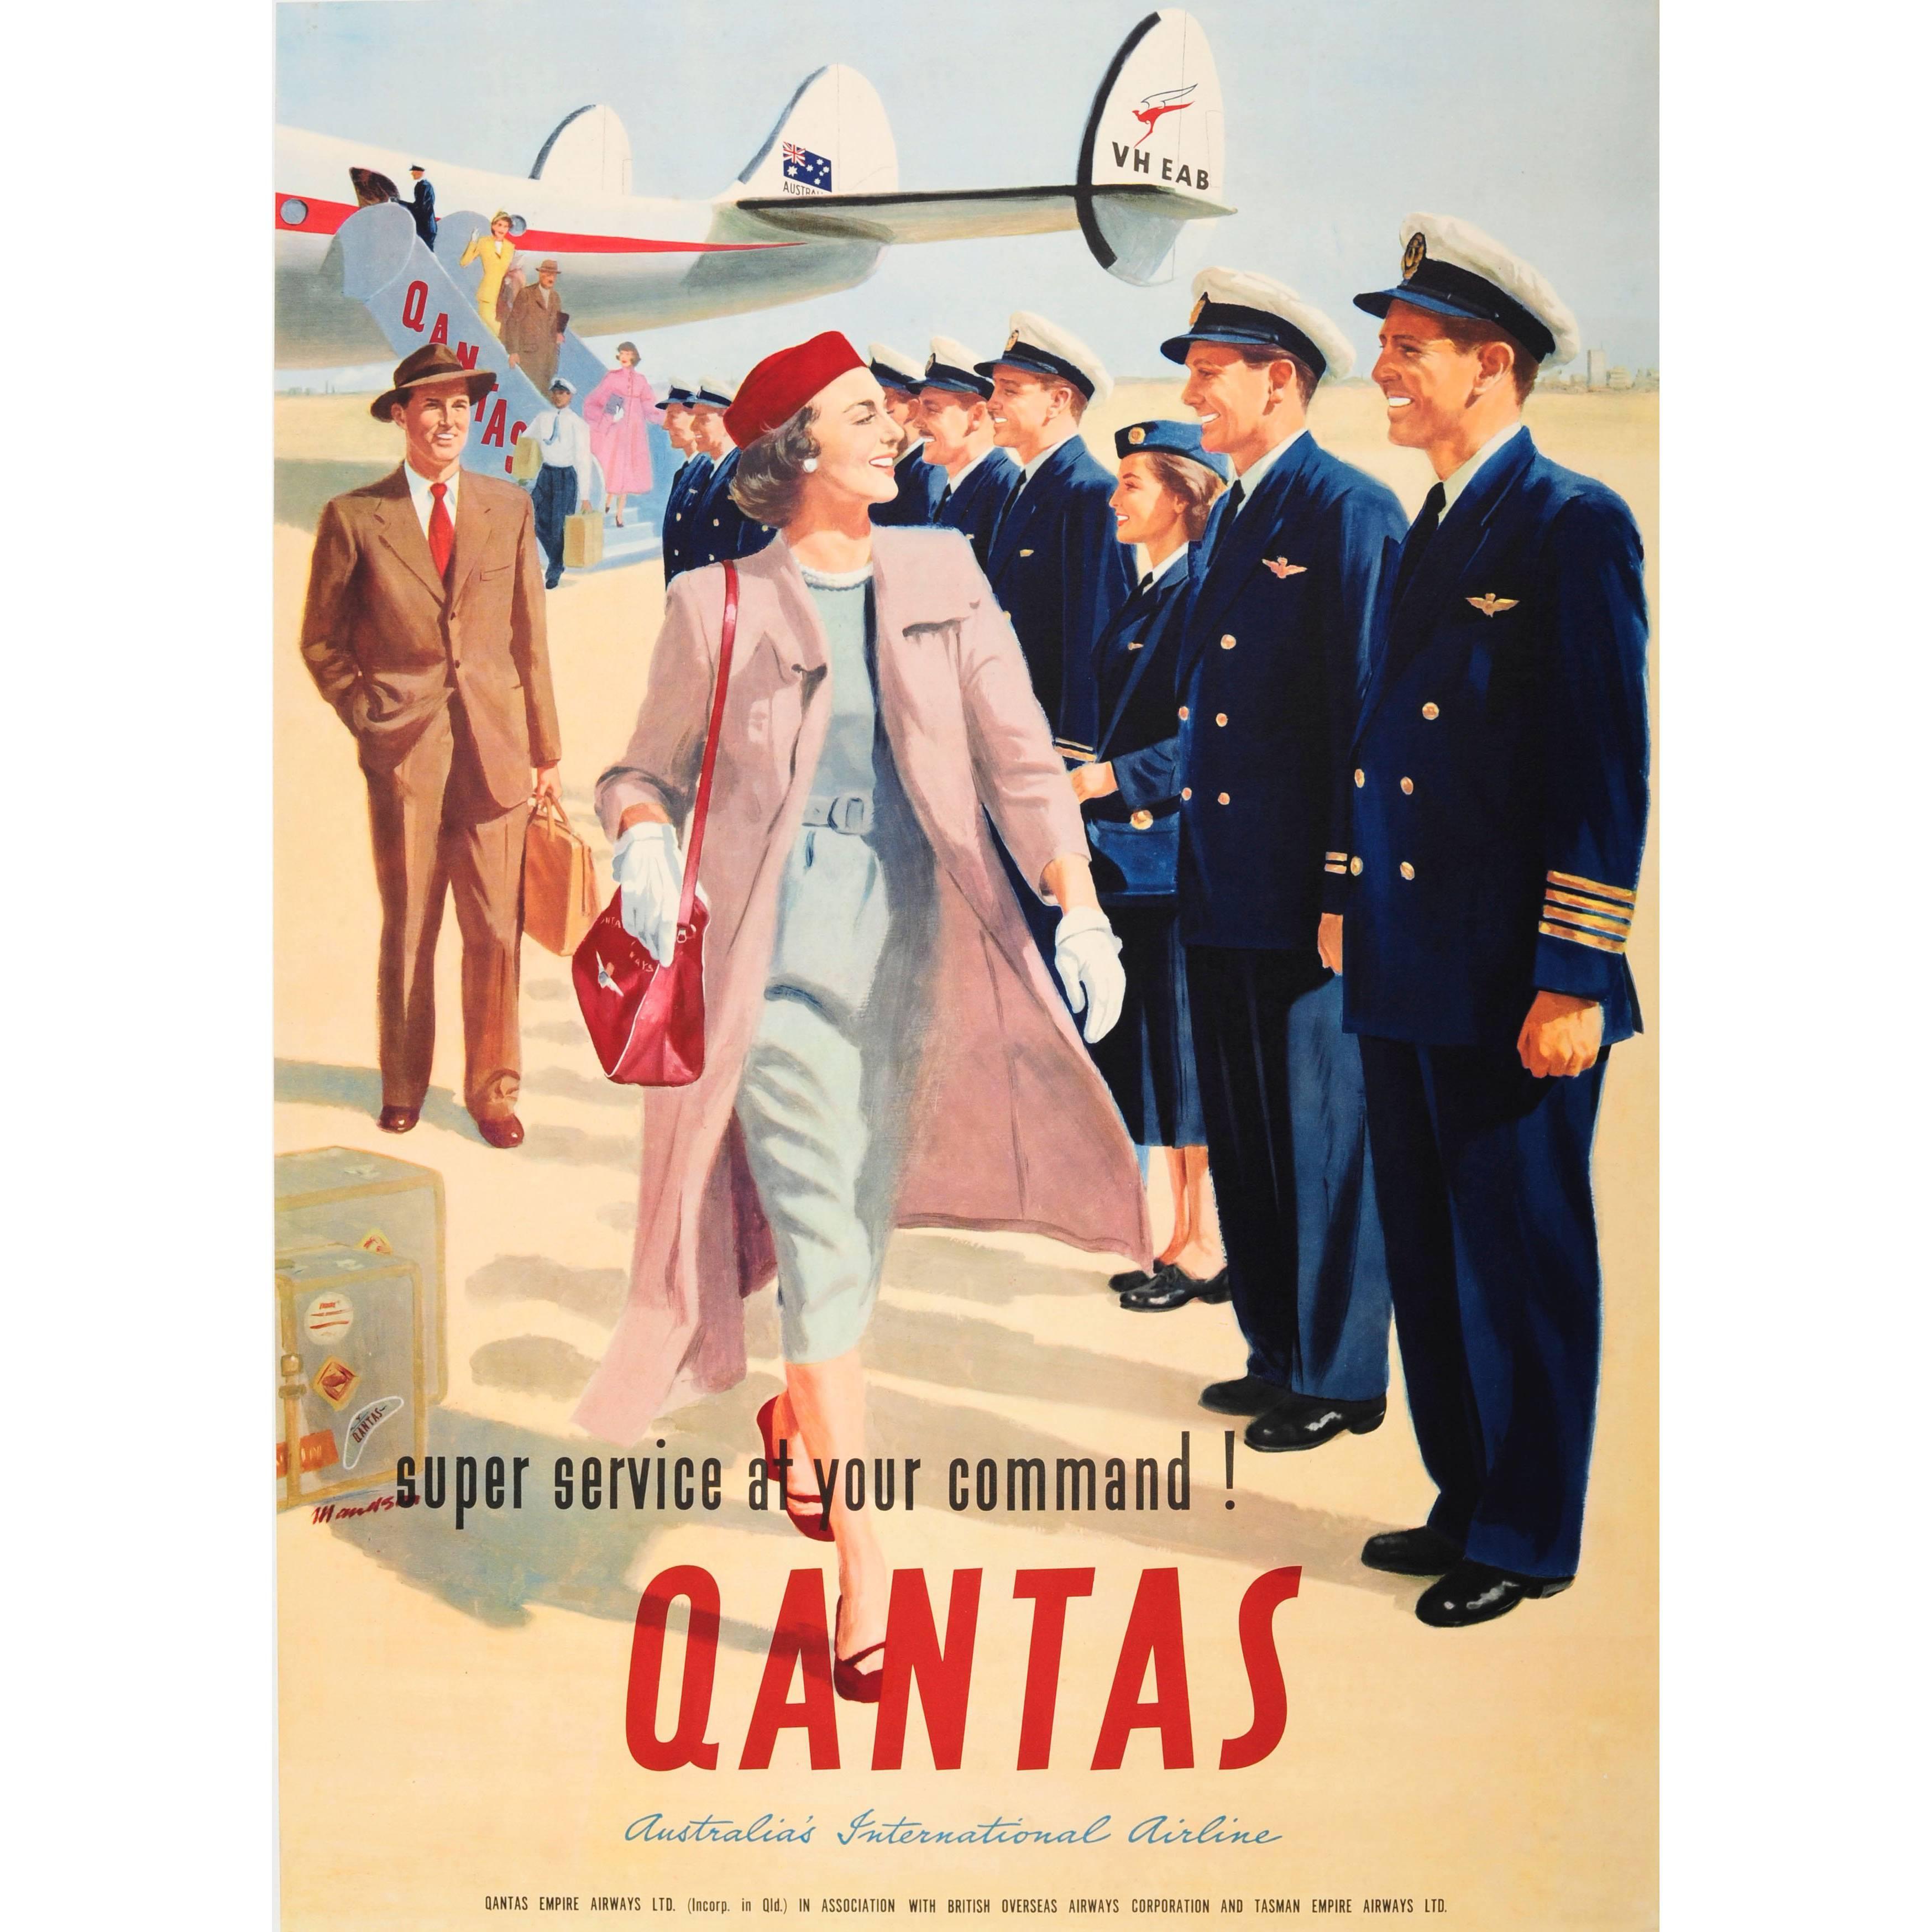 Original Vintage Australian Airline Travel Poster for Qantas - At Your Command!